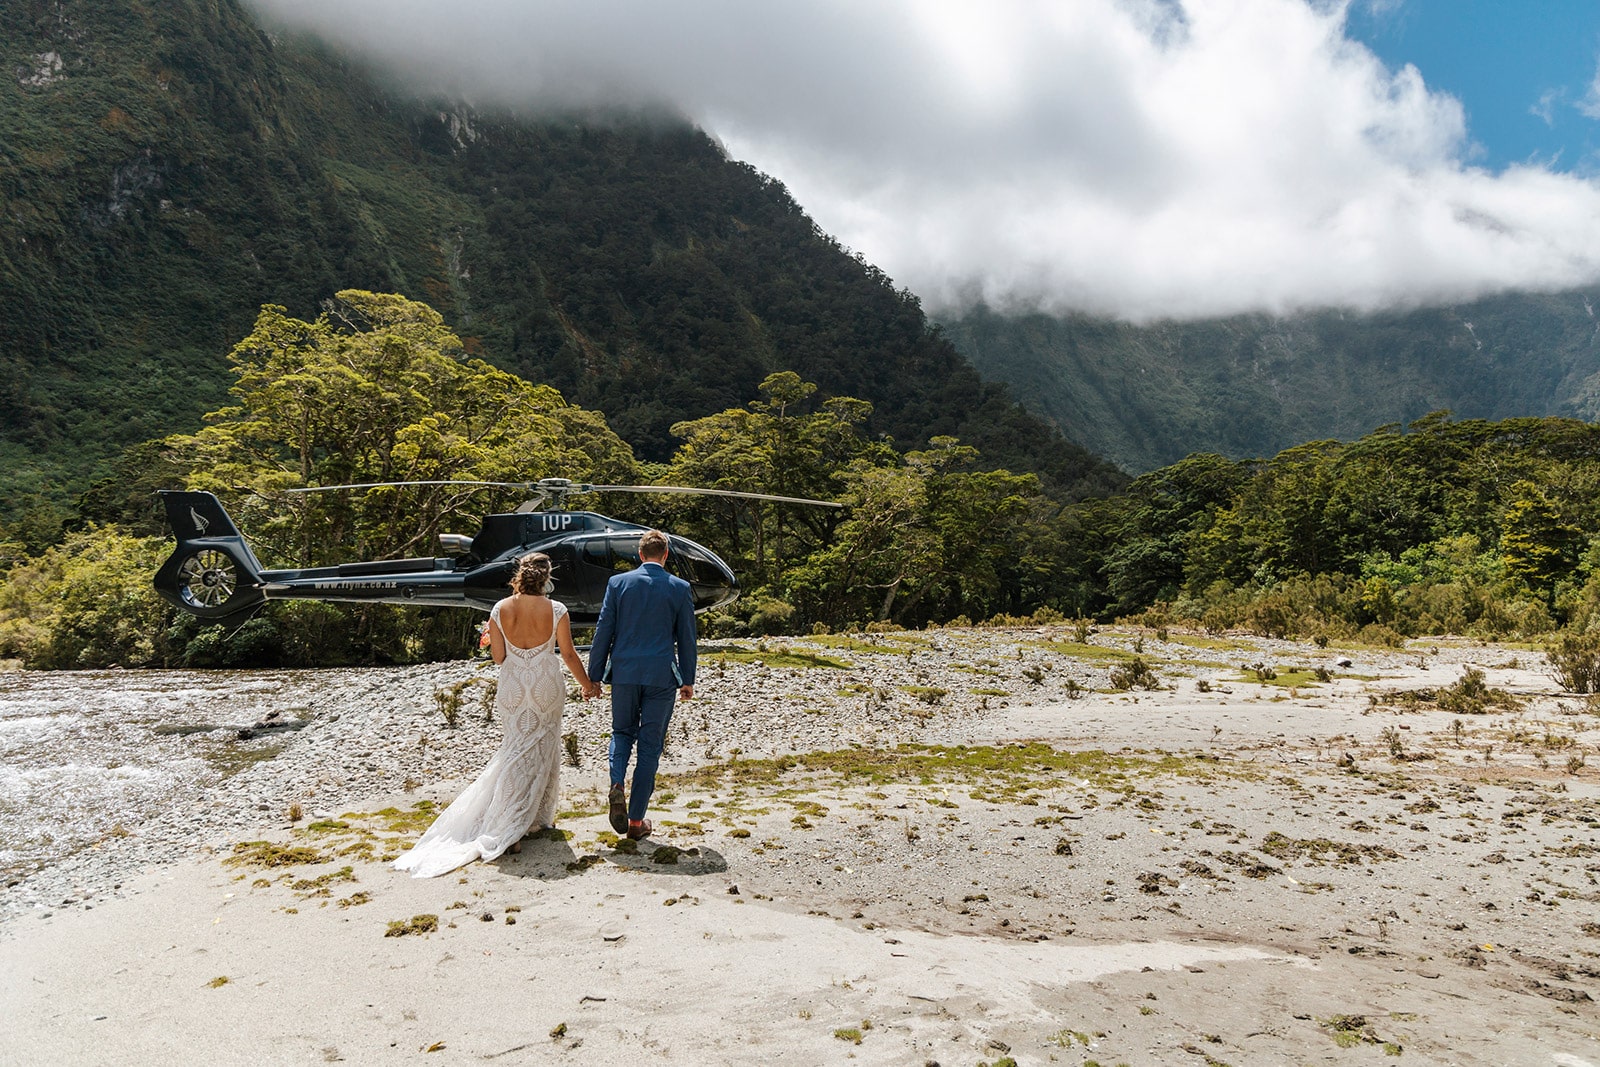 The best heli wedding package in Queenstown, The Majestic Heli Wedding at Milford Sounds